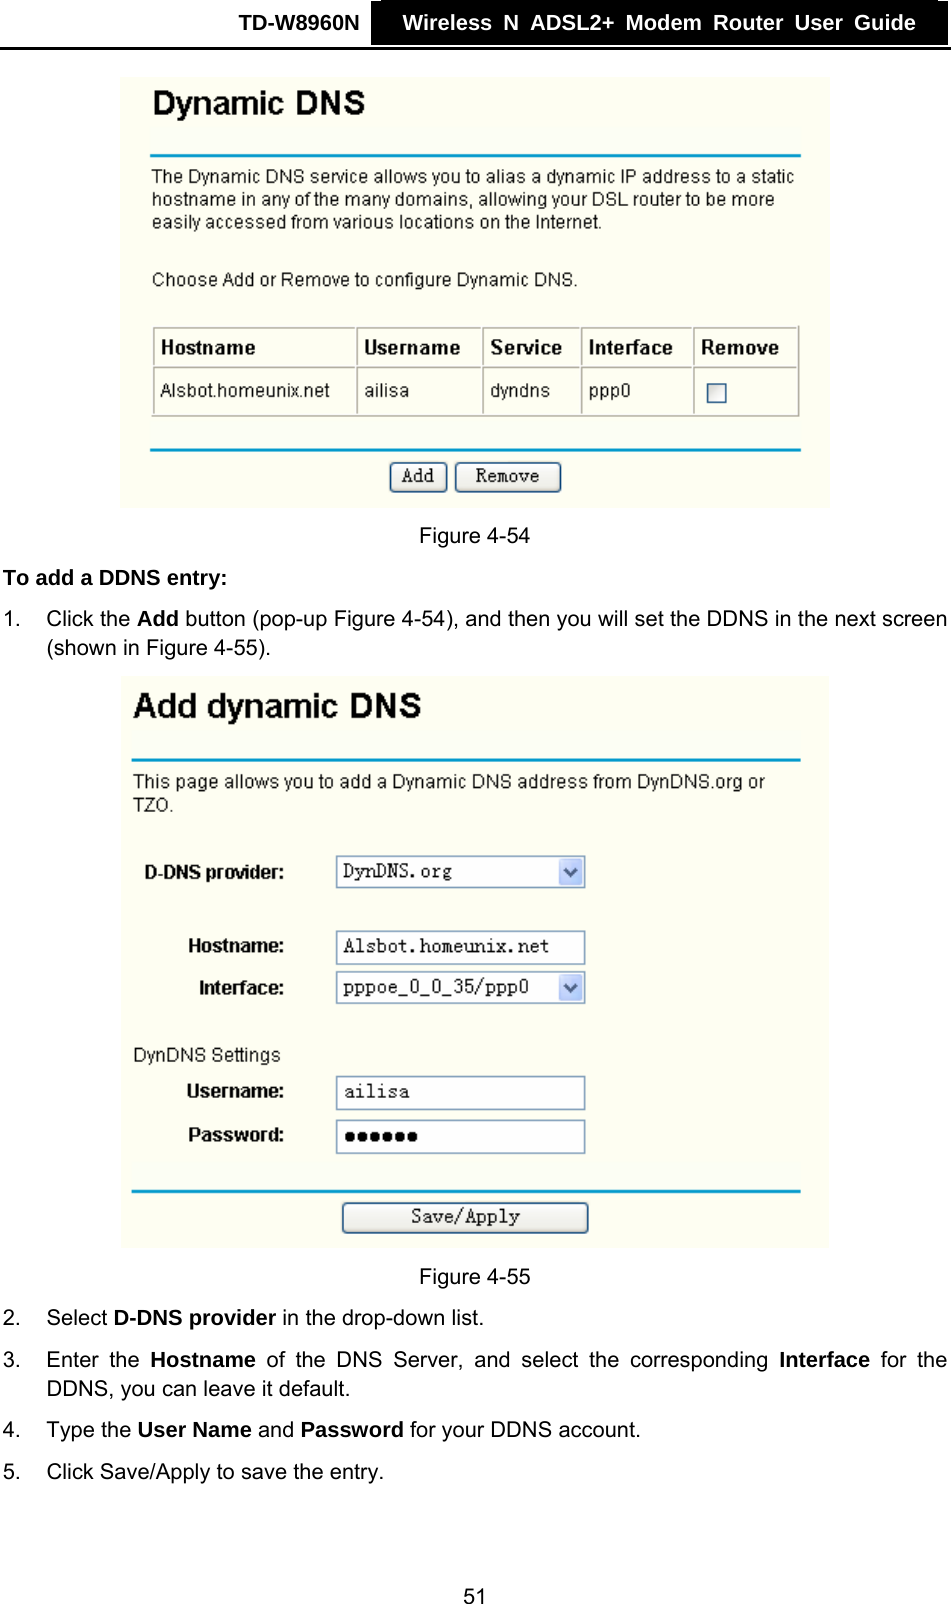 TD-W8960N    Wireless N ADSL2+ Modem Router User Guide     Figure 4-54 To add a DDNS entry: 1. Click the Add button (pop-up Figure 4-54), and then you will set the DDNS in the next screen (shown in Figure 4-55).  Figure 4-55 2. Select D-DNS provider in the drop-down list. 3. Enter the Hostname of the DNS Server, and select the corresponding Interface for the DDNS, you can leave it default. 4. Type the User Name and Password for your DDNS account. 5.  Click Save/Apply to save the entry. 51 